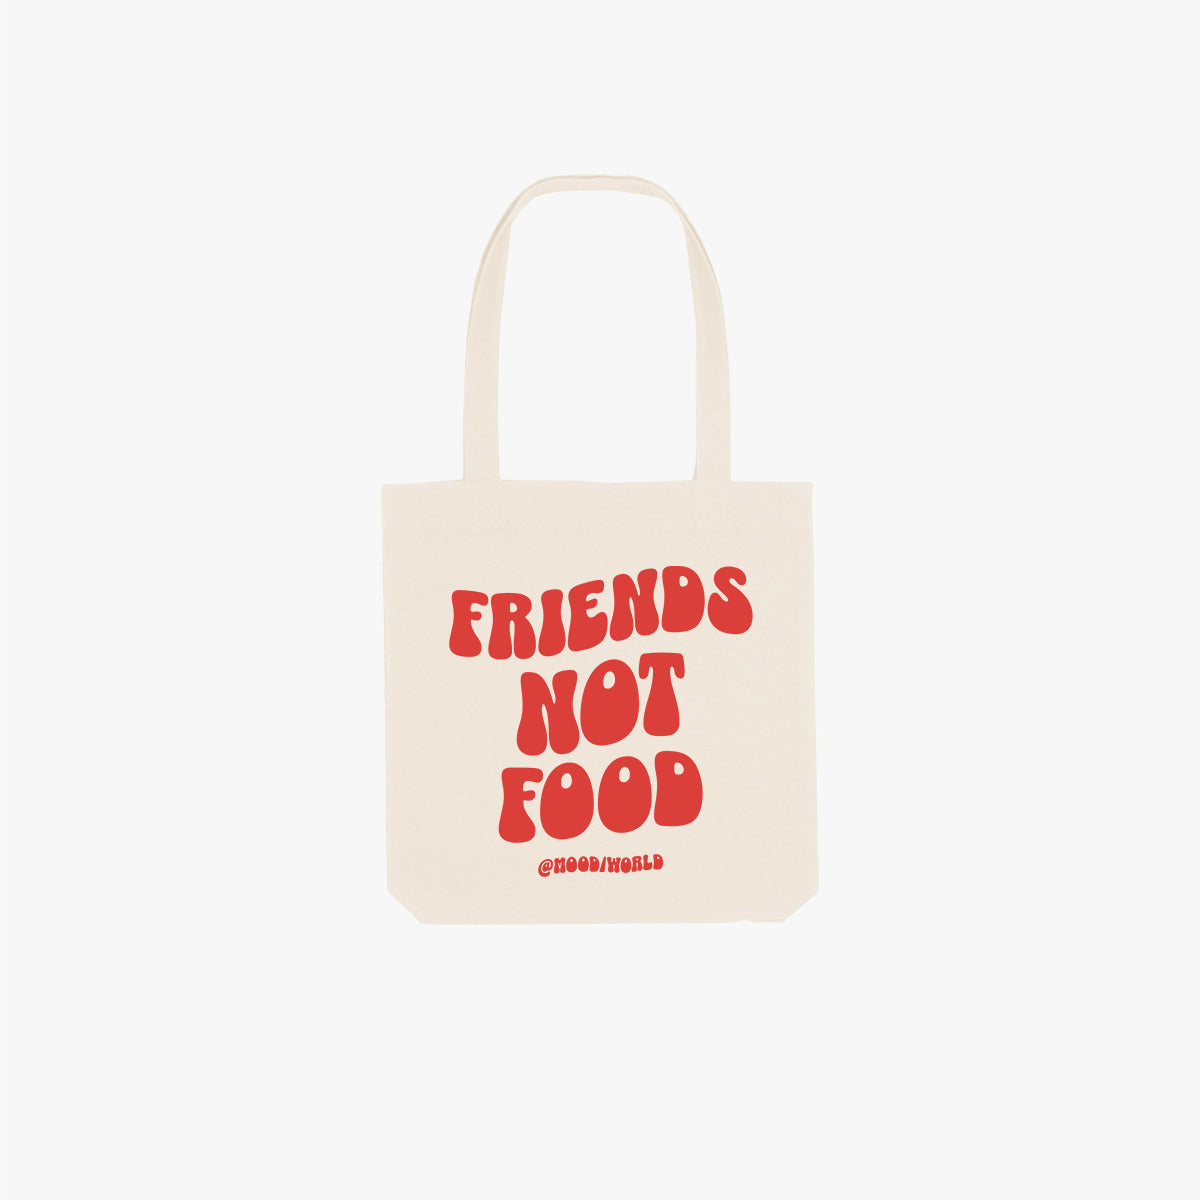 'FRIENDS NOT FOOD Wave' Organic Tote-Bag aus 80% recycelter Bio-Baumwolle und 20% recyceltem Polyester in der Farbe Natural